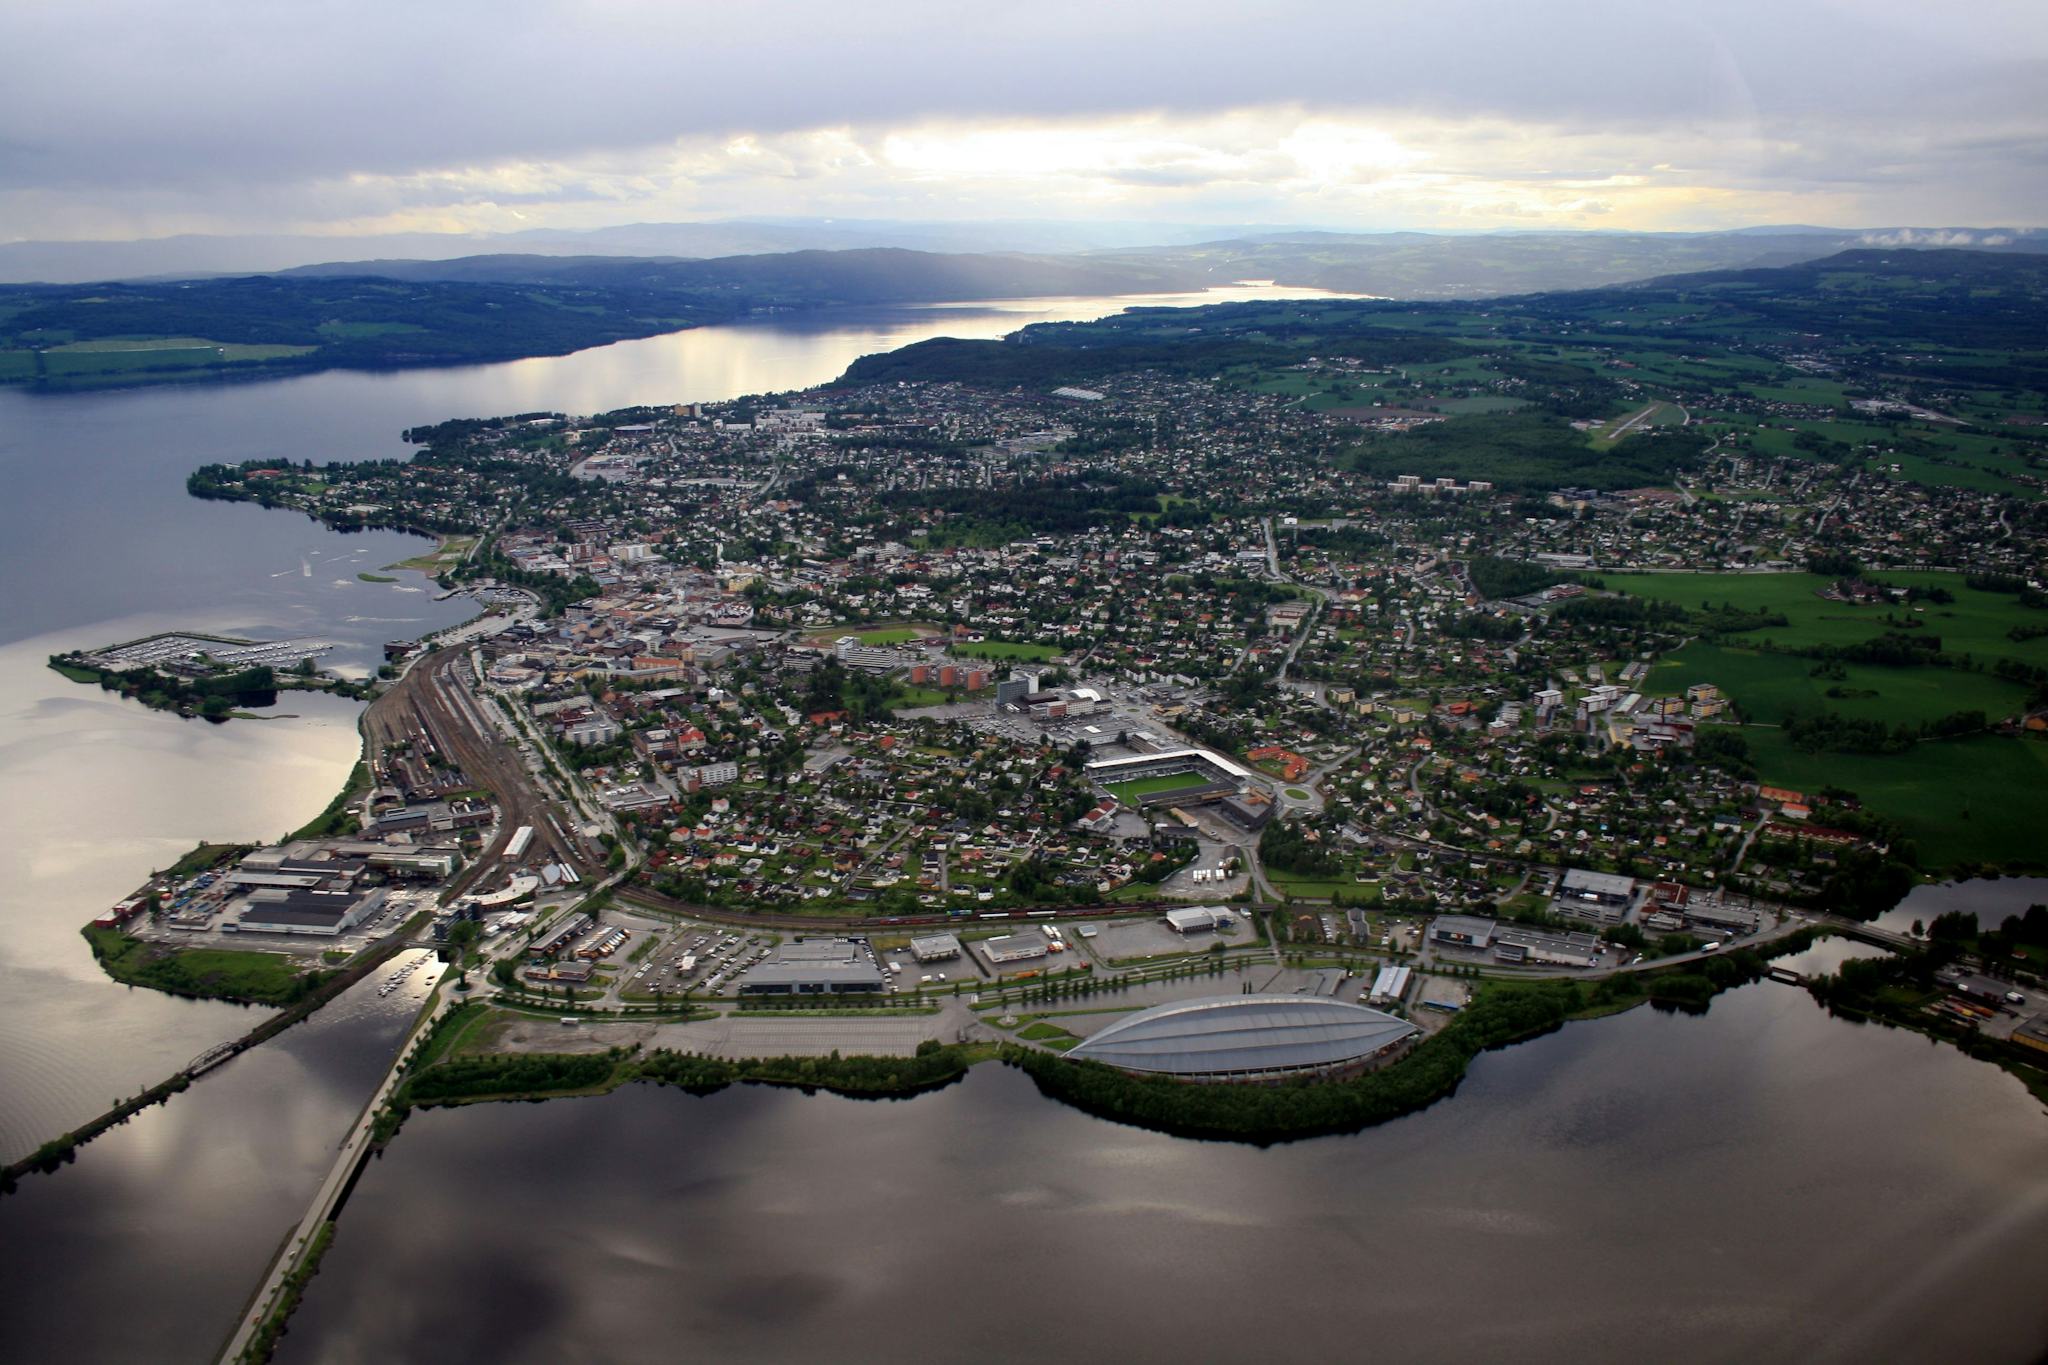 An aerial view of a coastal town with dense buildings and stadium near the water's edge